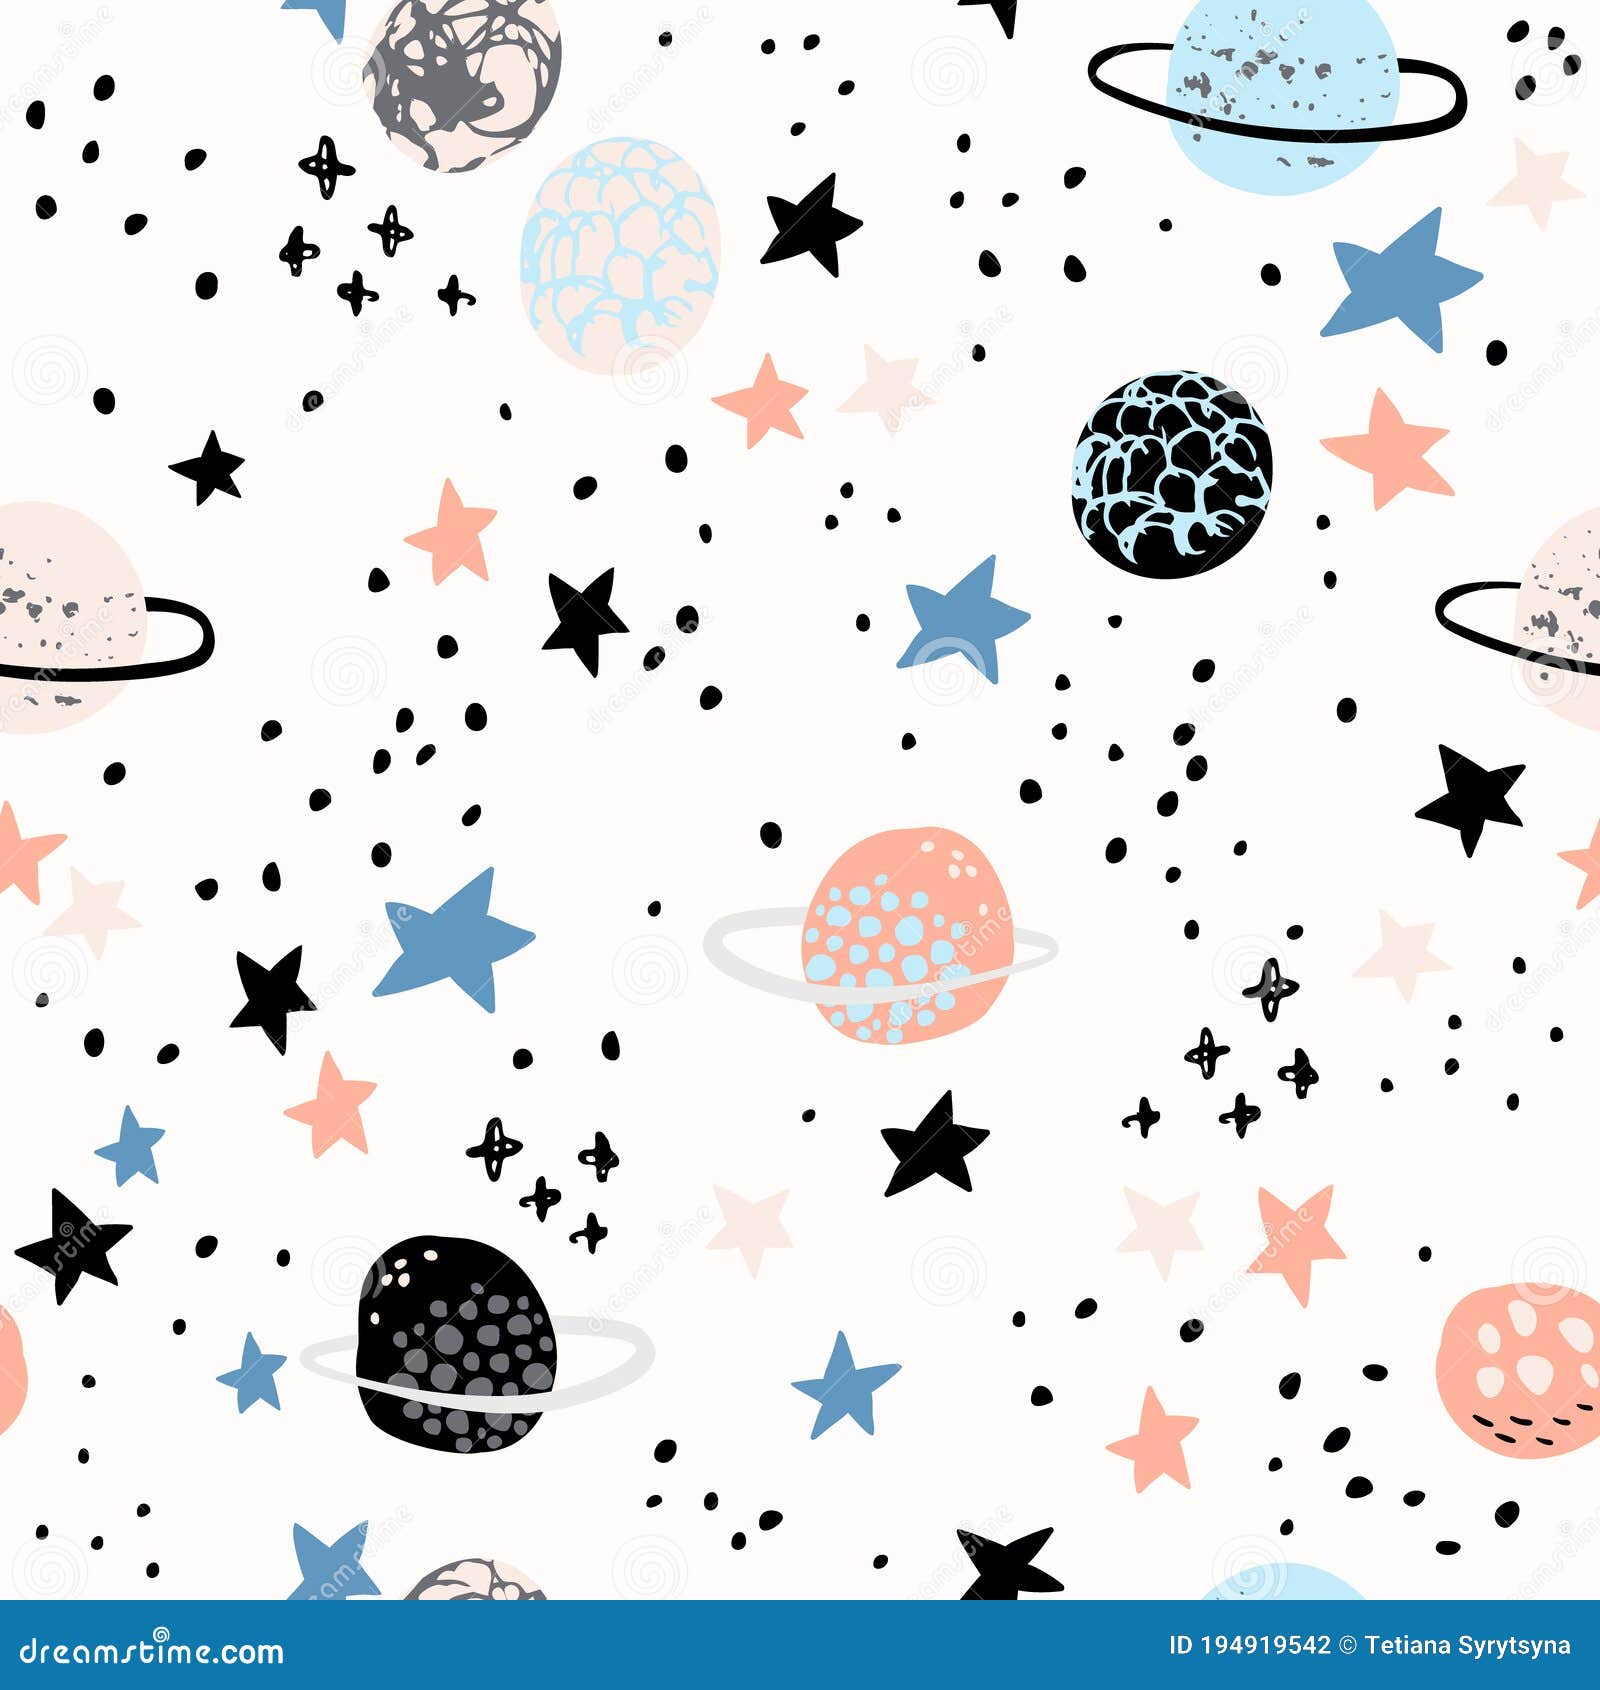 Cartoon Space Themed Background: Cute Planets, Moon, Stars, Galaxy, Milky  Way with Grunge, Doodle Textures Stock Vector - Illustration of drawn,  circle: 194919542